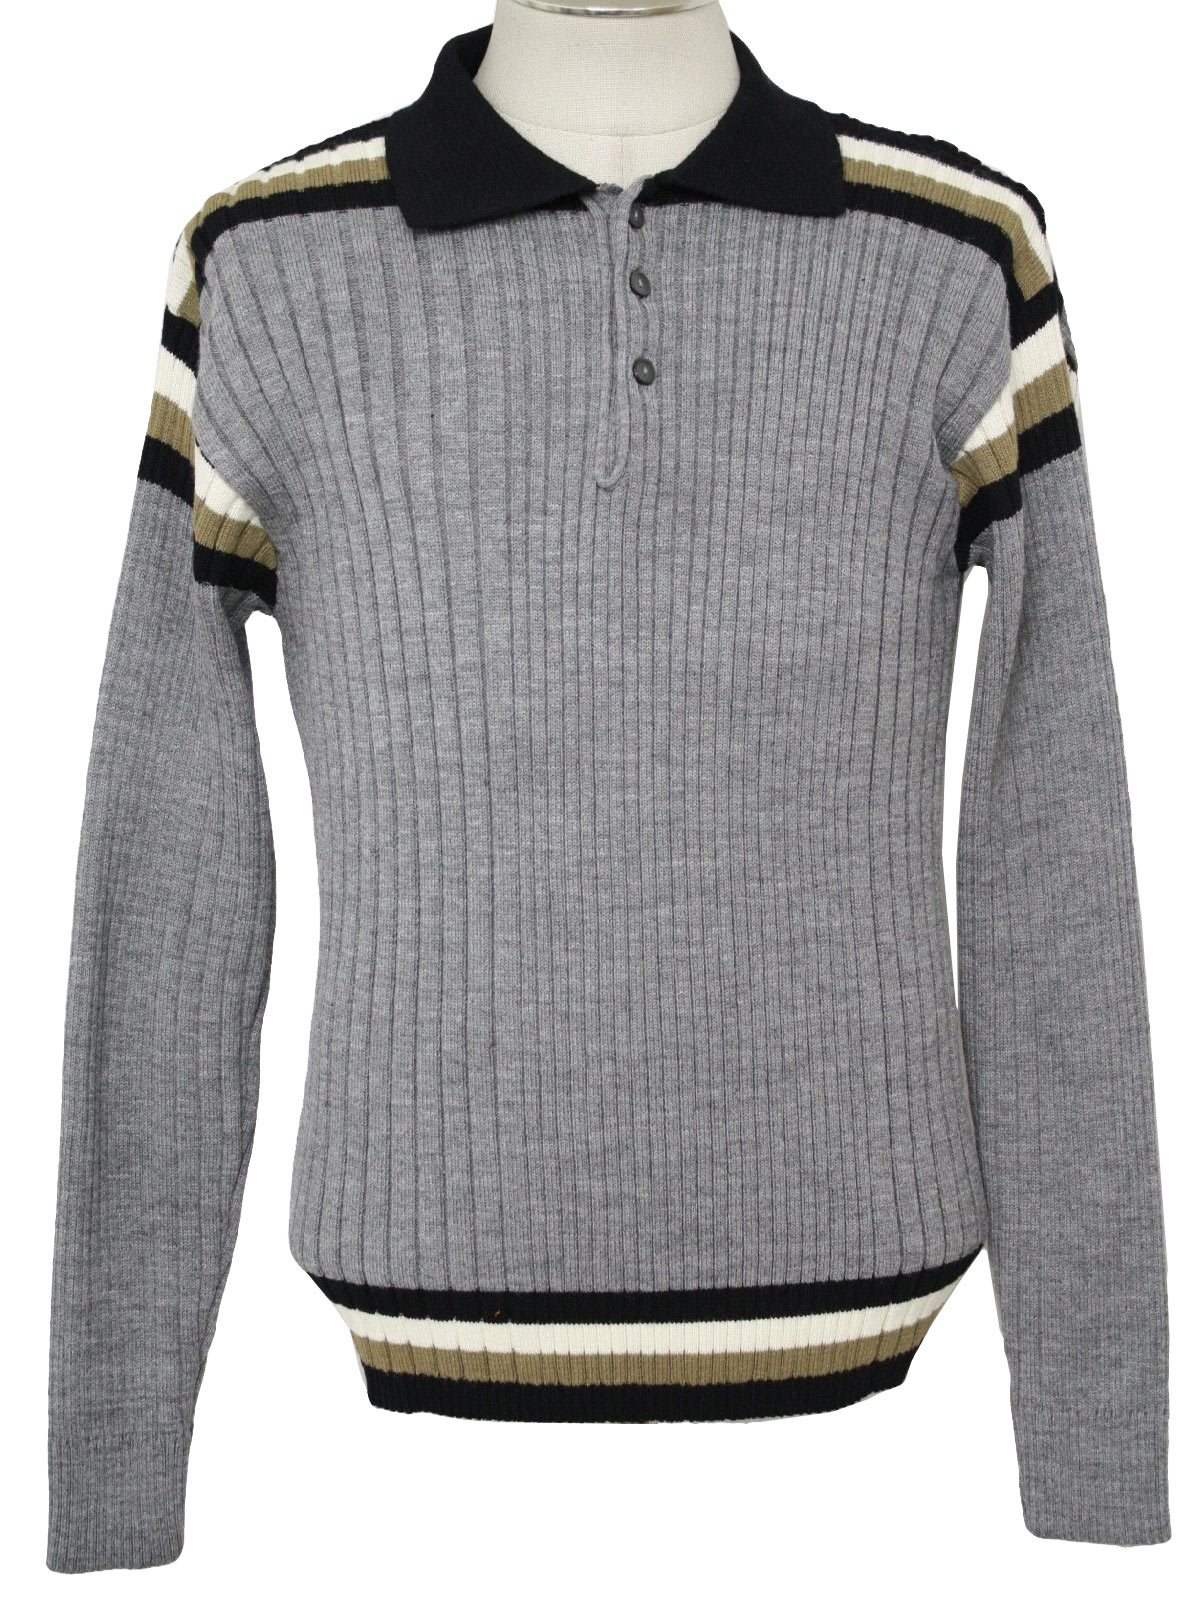 90s Retro Sweater: 90s -Missing Label- Mens grey, black, tan and white ...